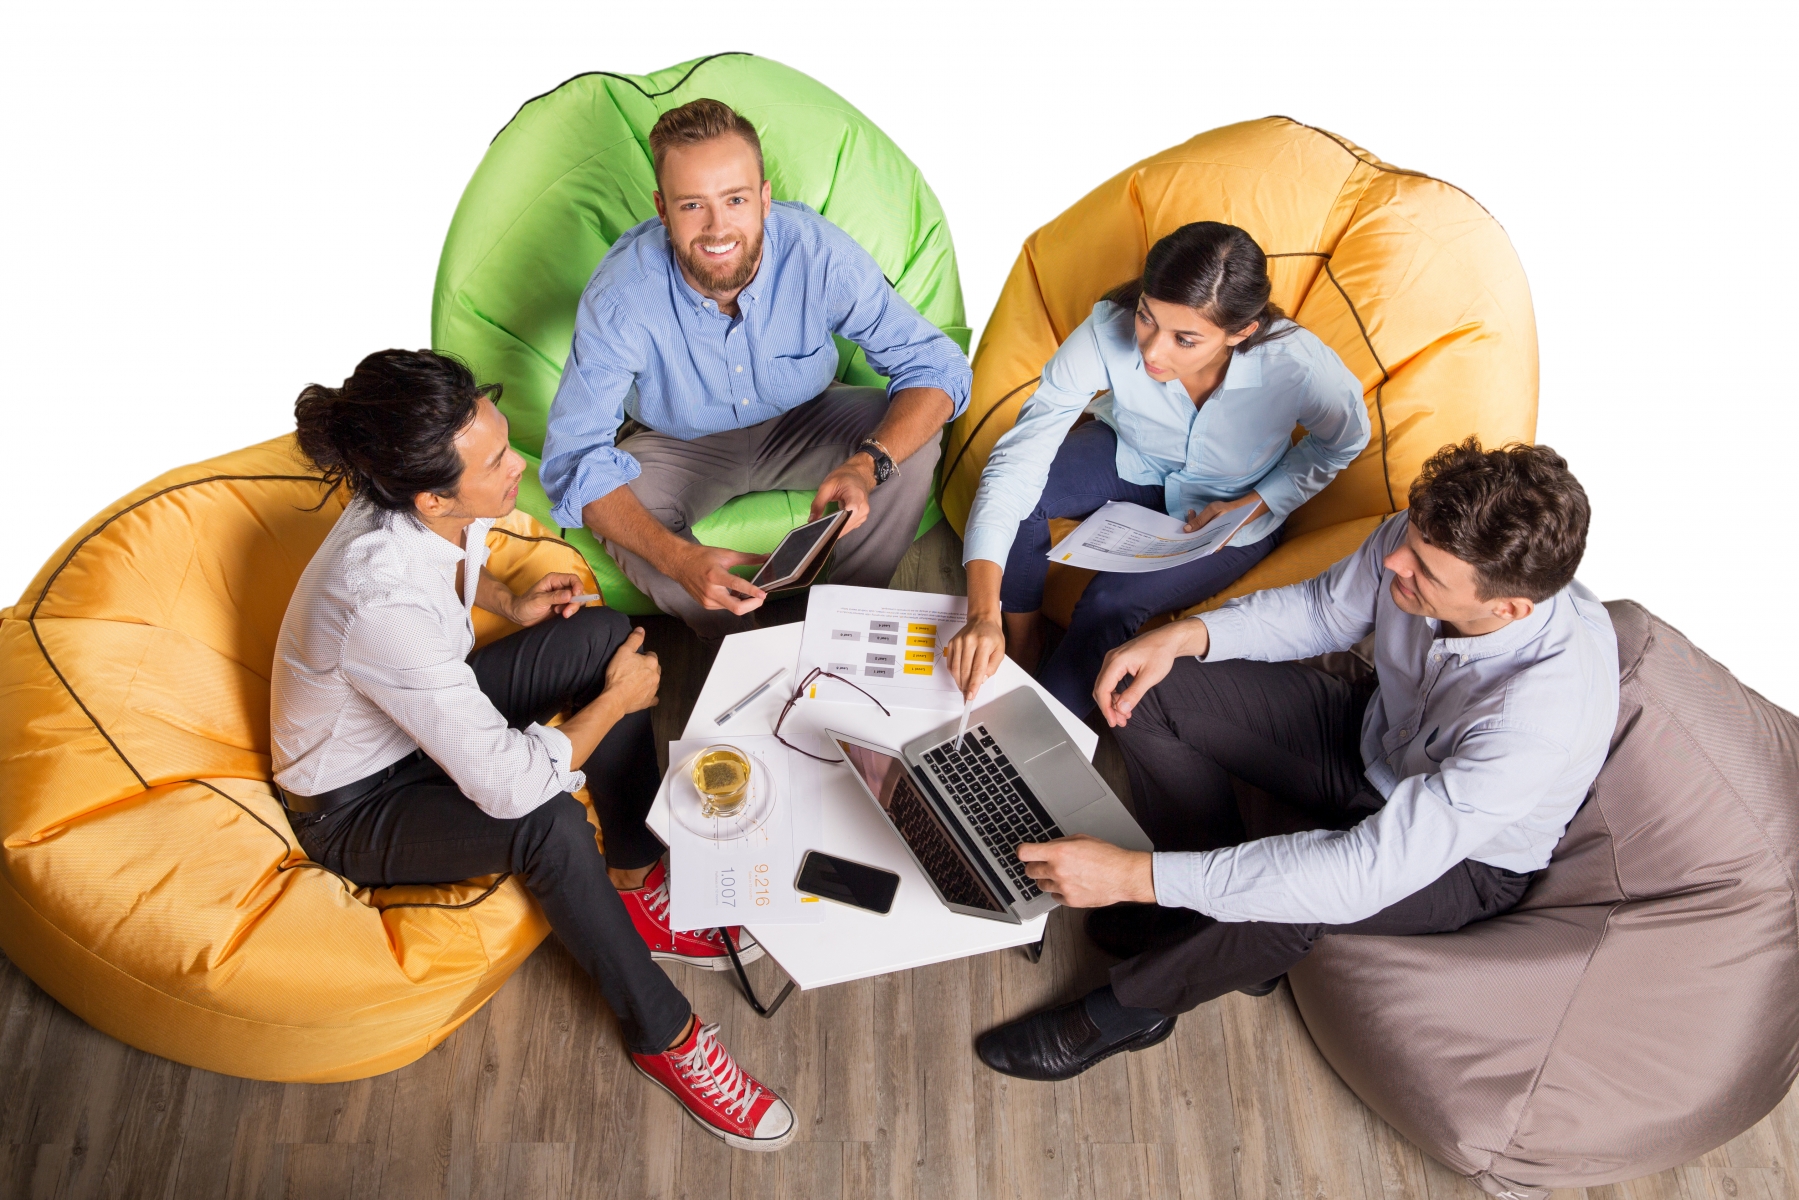 Four content young business people sitting on beanbag chairs around small café table, working and discussing issues. One man is looking at camera and smiling. High angle view.